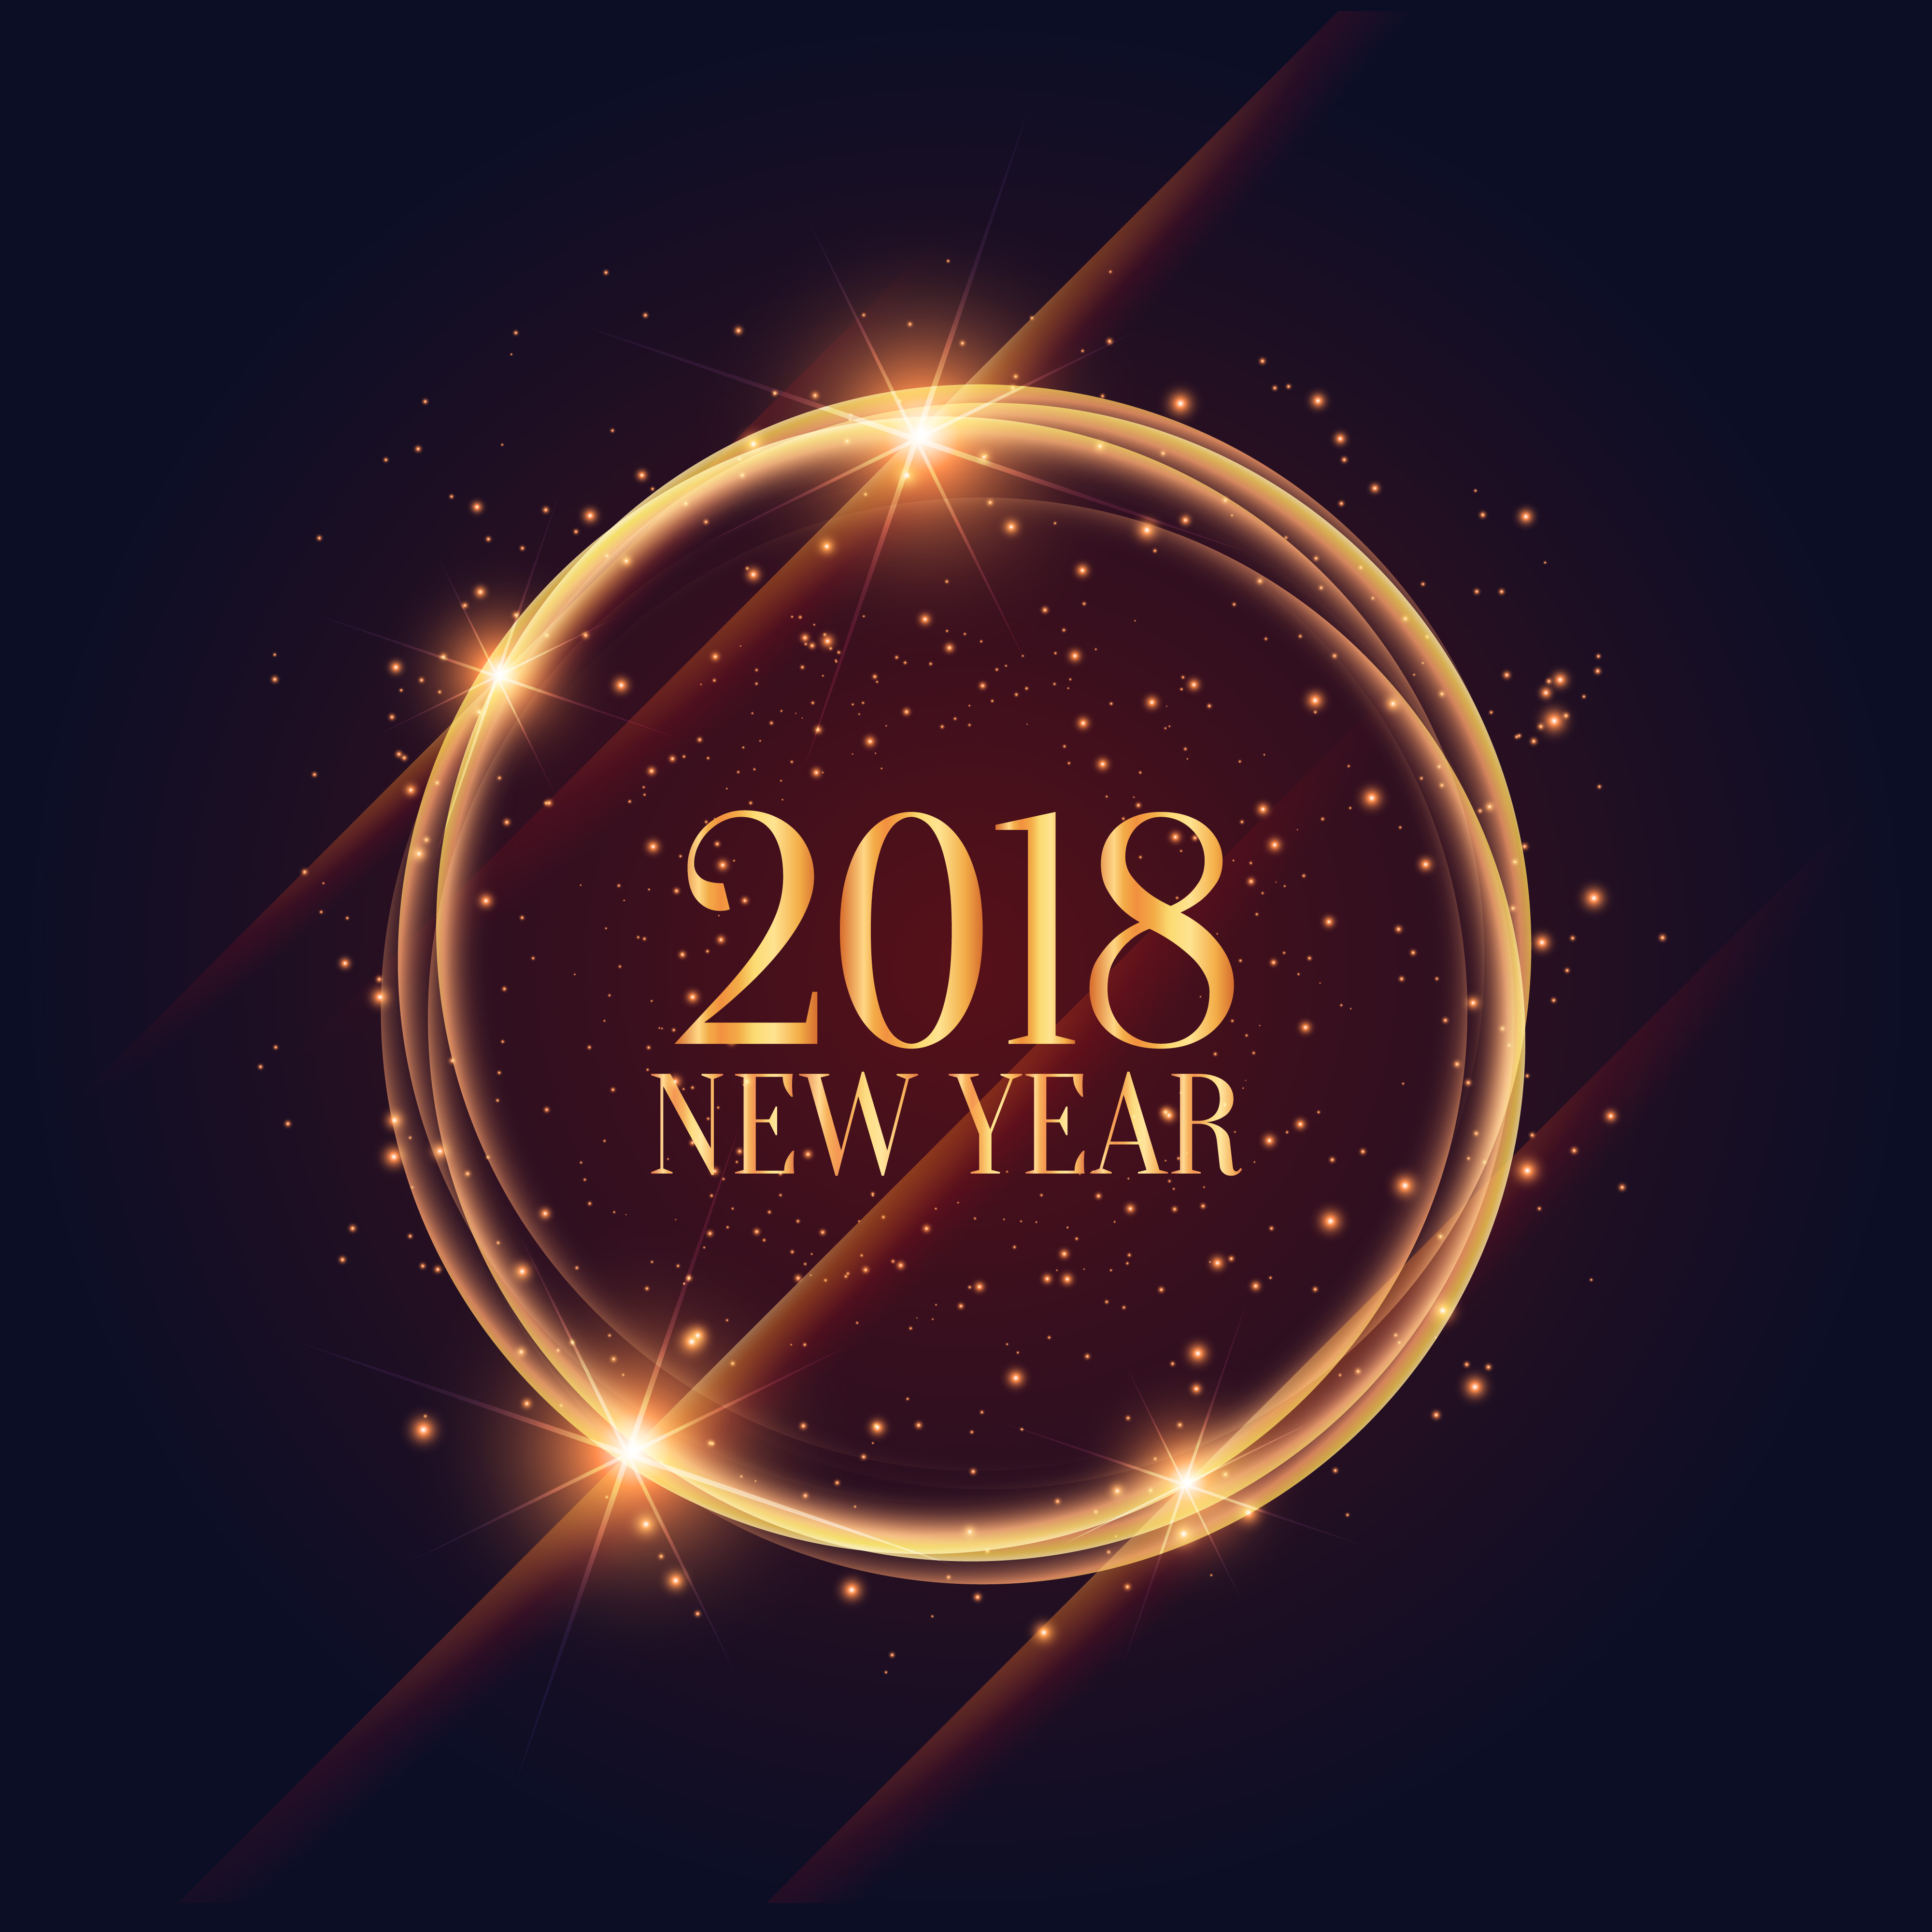 New Year images 3D 2018 free downloads | New Year 2018 